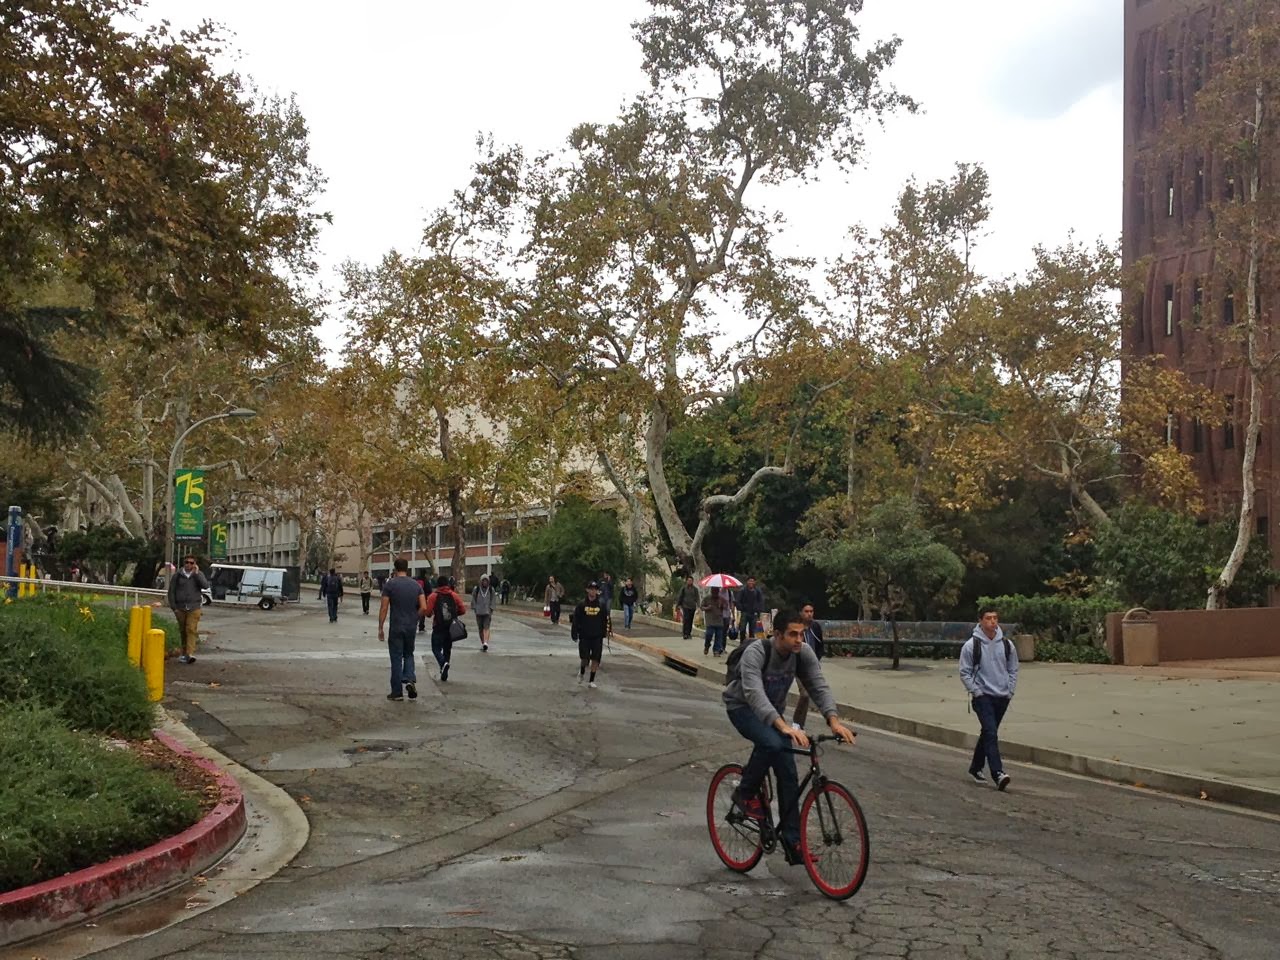 Experiencing Los Angeles: On Campus and on the Farm at Cal Poly Pomona